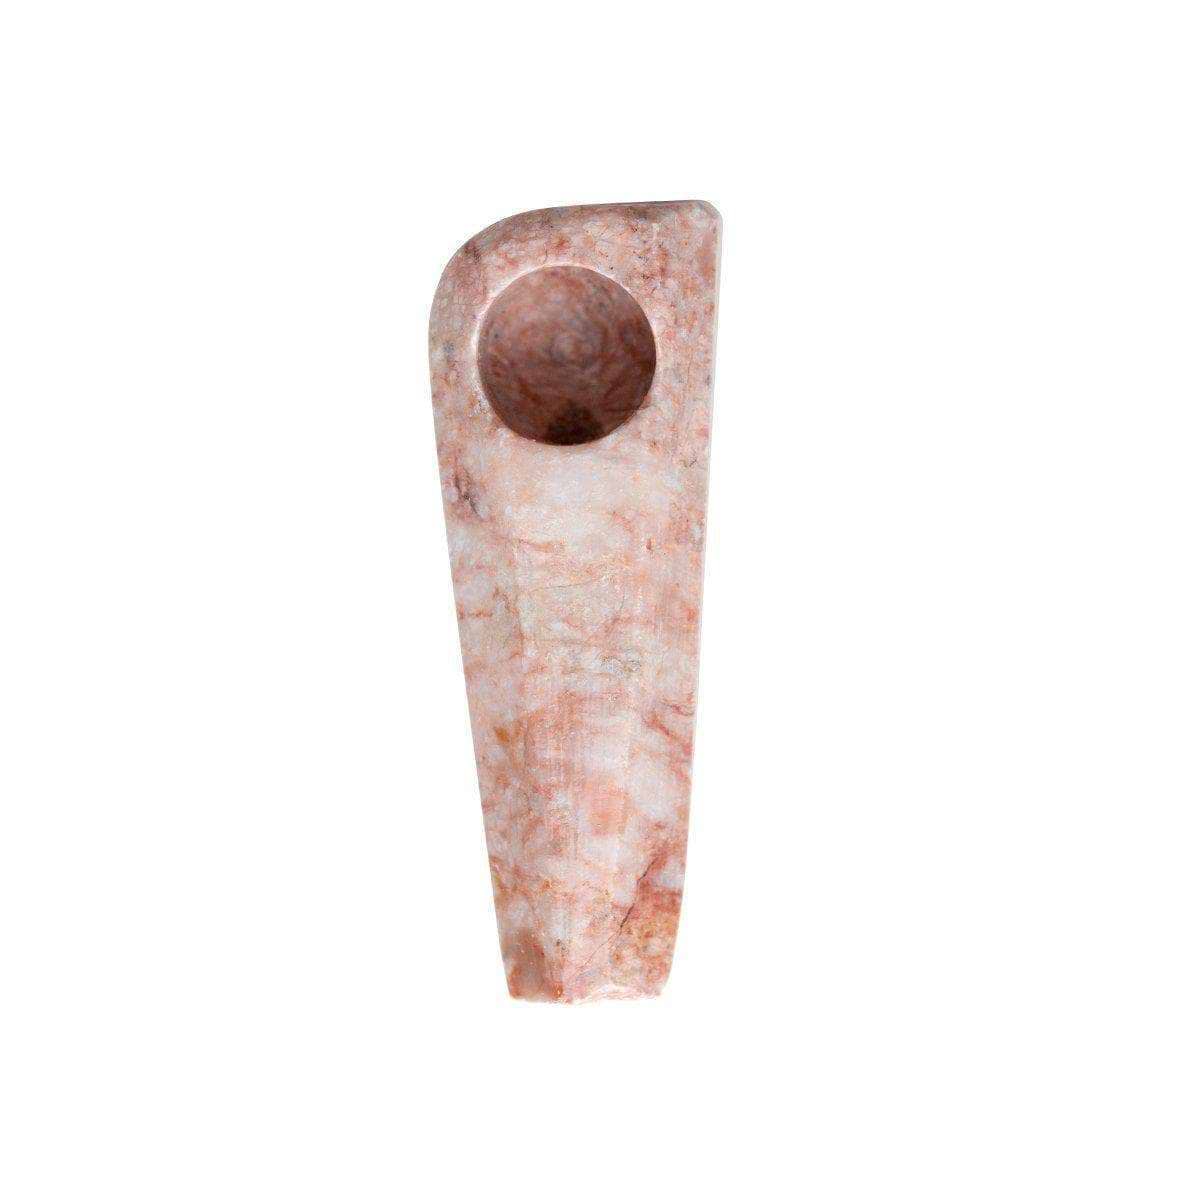 2-inch charming and compact pink quartz stone oney smoking device gemstone pipe